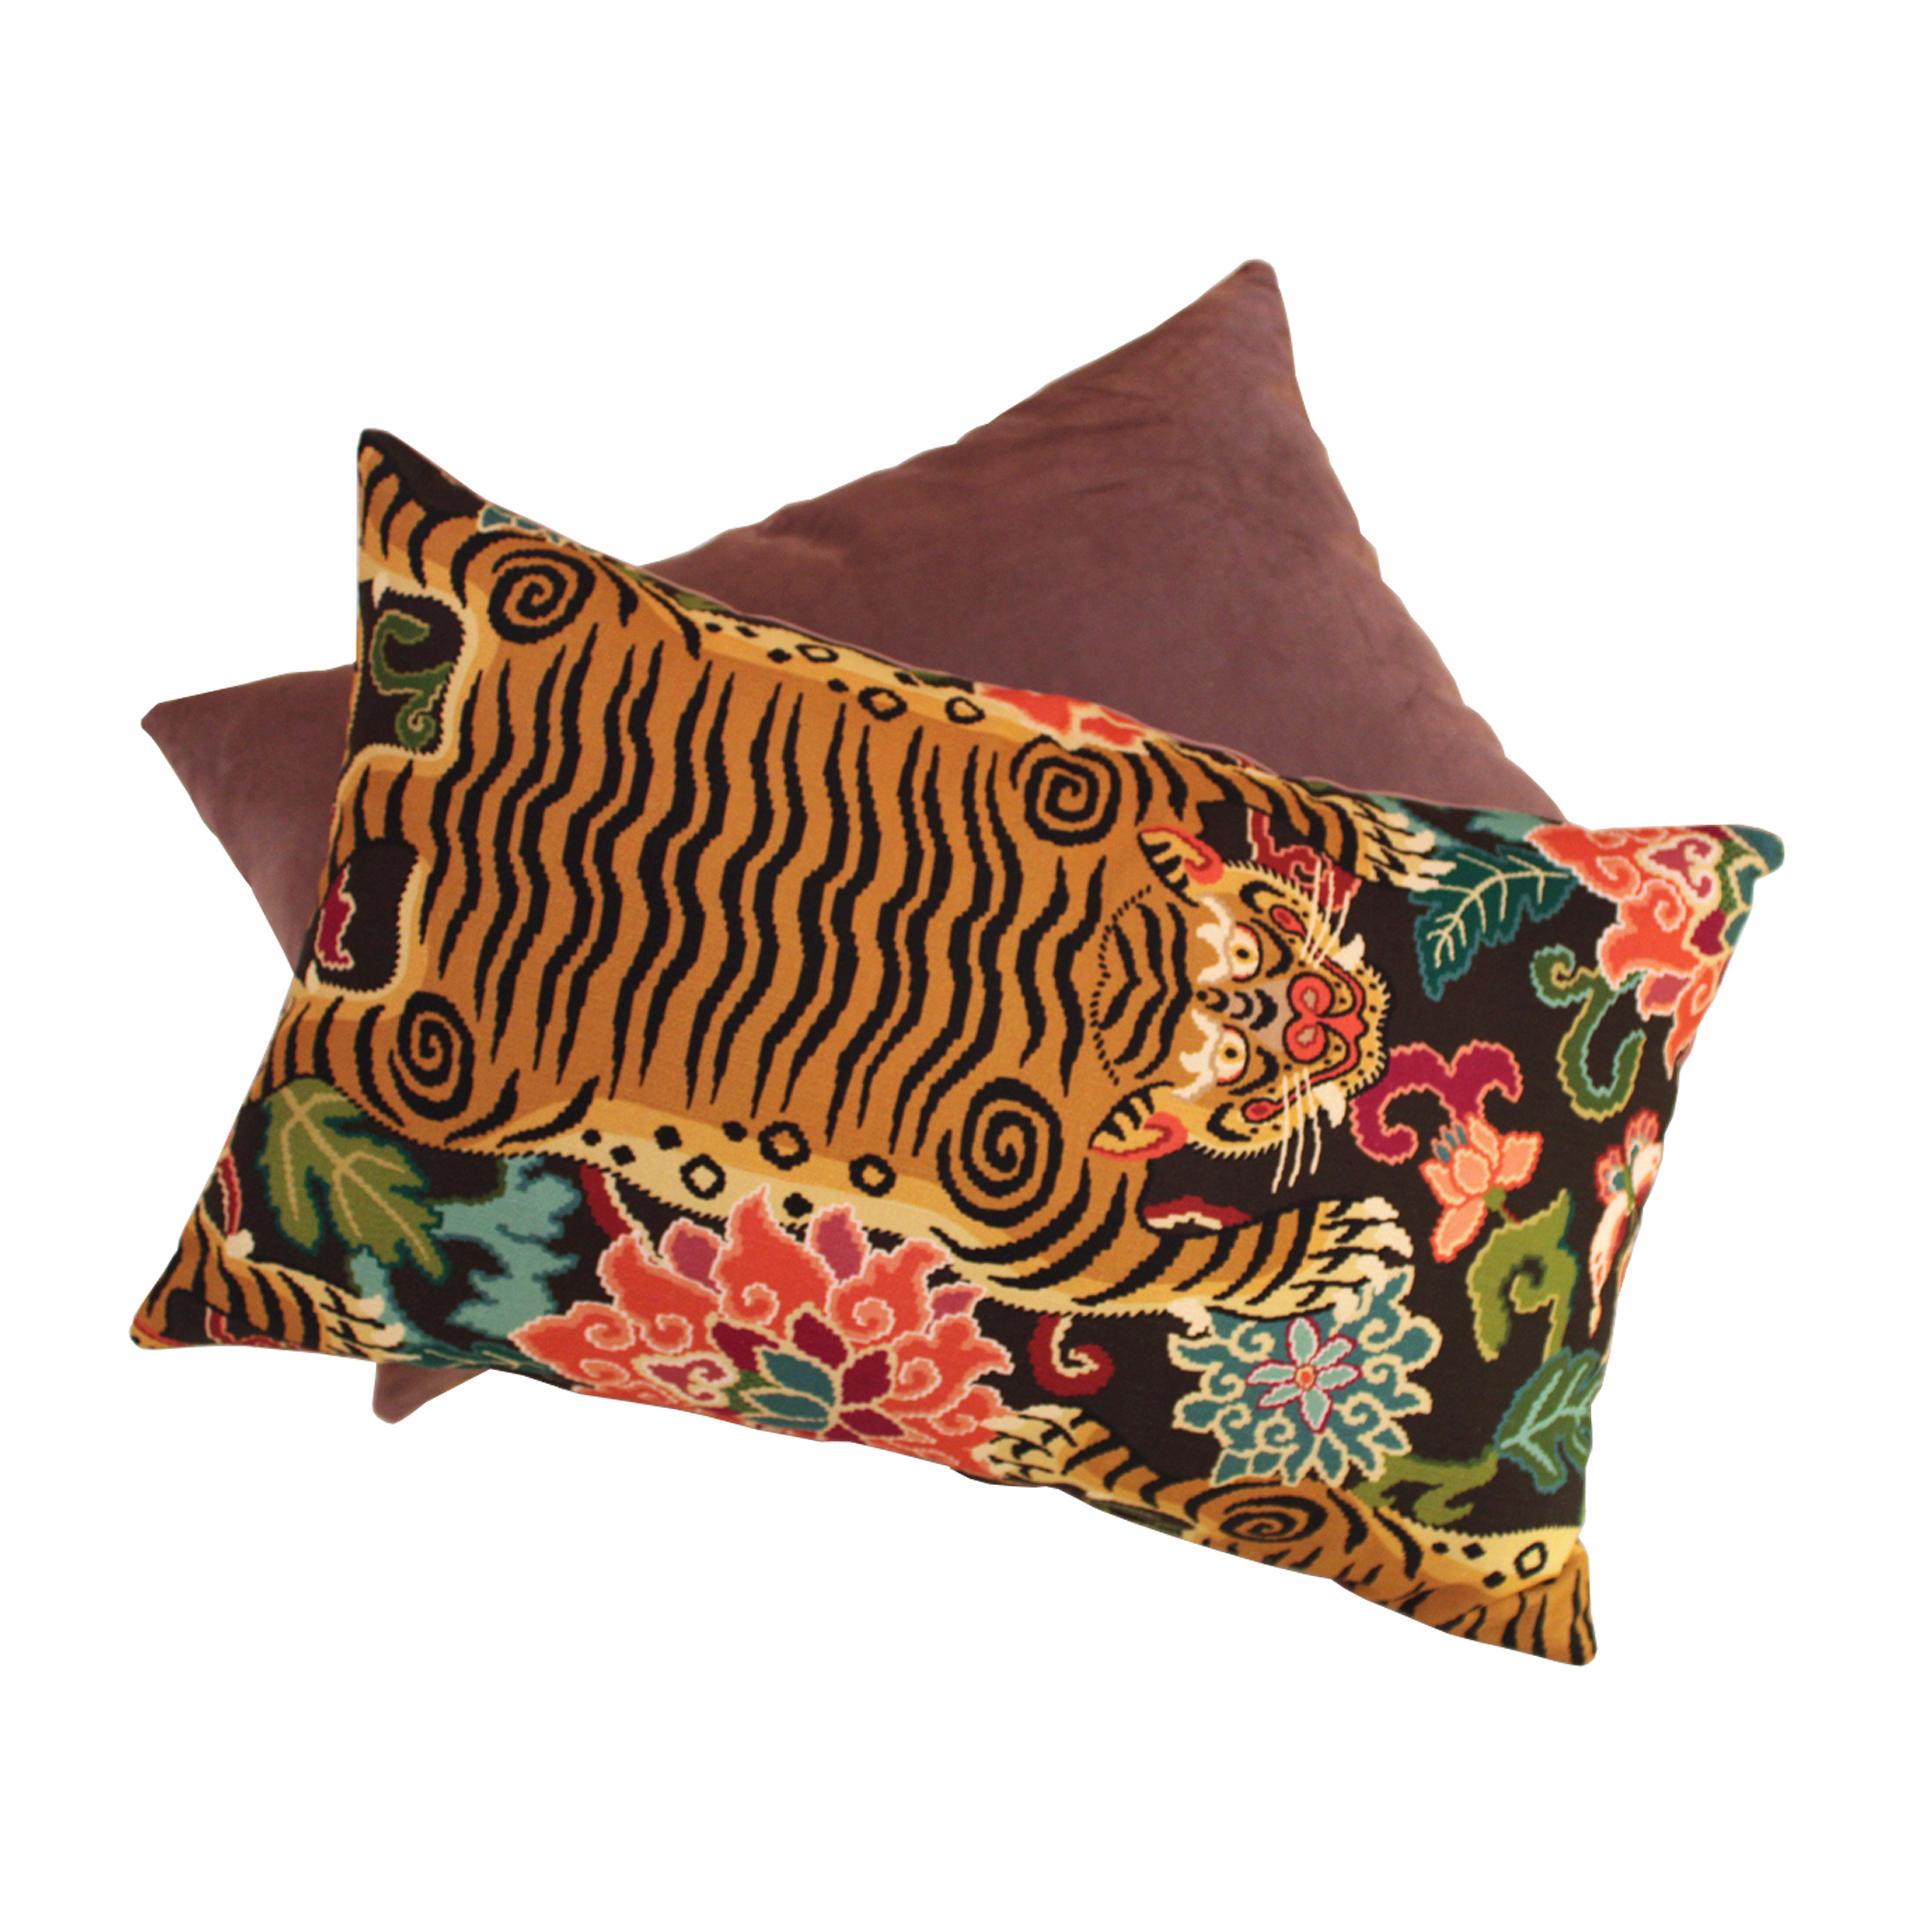 Cotton velvet cushions with jungle motifs, feather filling included.

Every item LA Studio offers is checked by our team of 10 craftsmen in our in-house workshop. Special restoration or reupholstery requests can be done. Lighting can be electrified